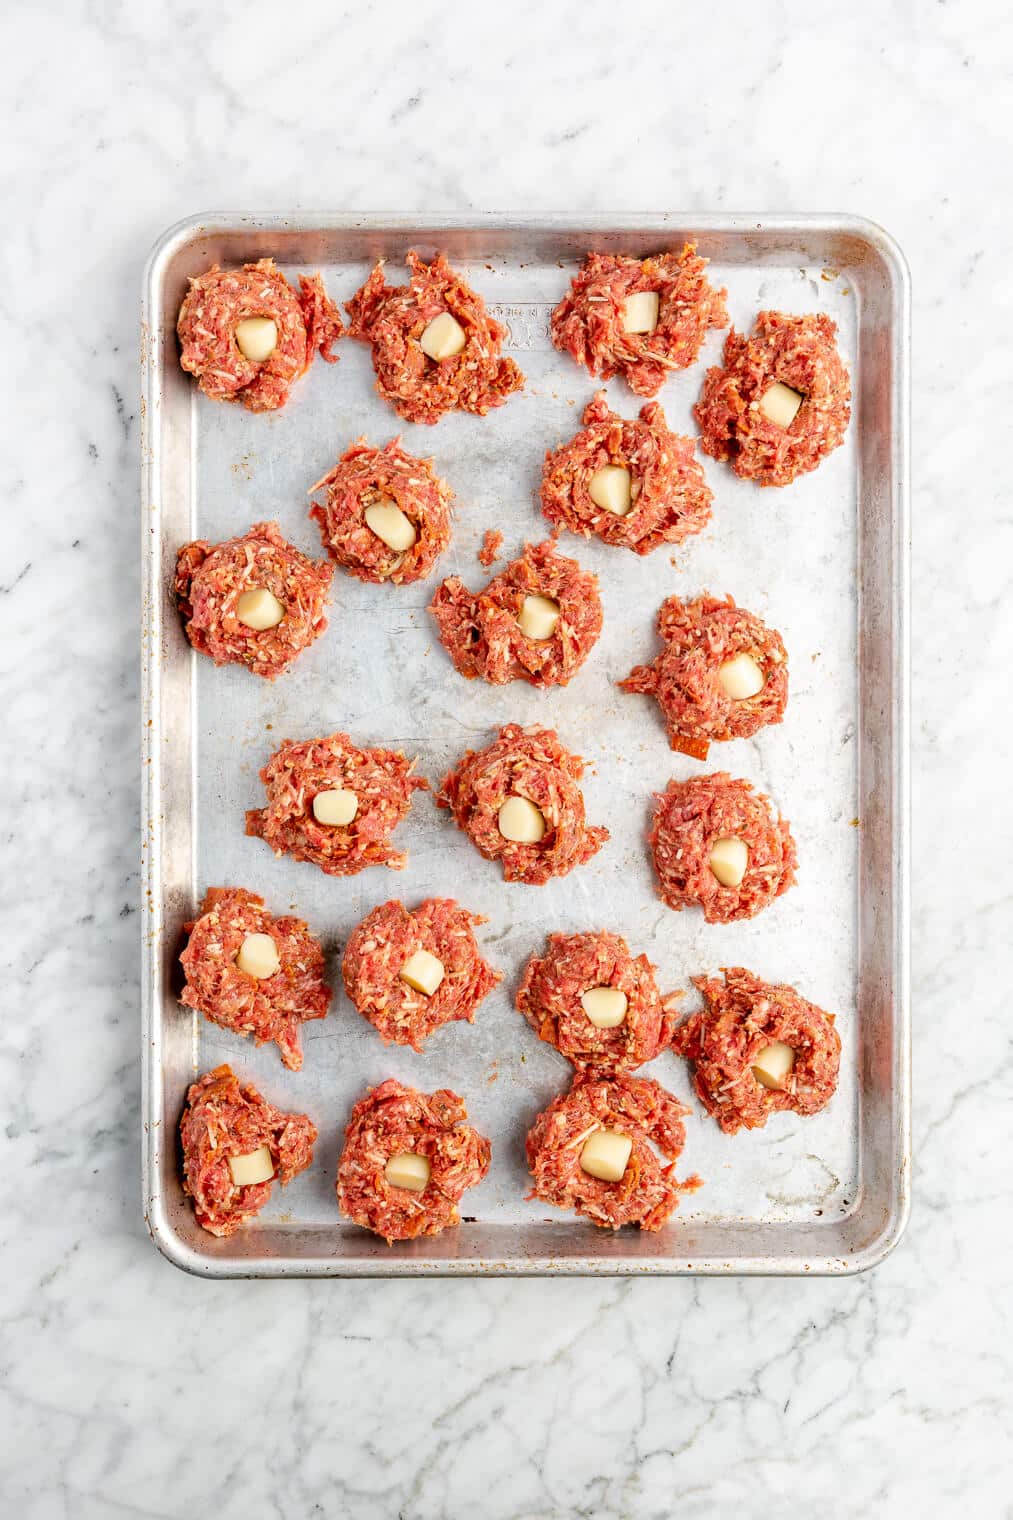 Raw pizza meatballs with a piece of a cheese stick in the middle of each one on a sheet pan before being rolled.